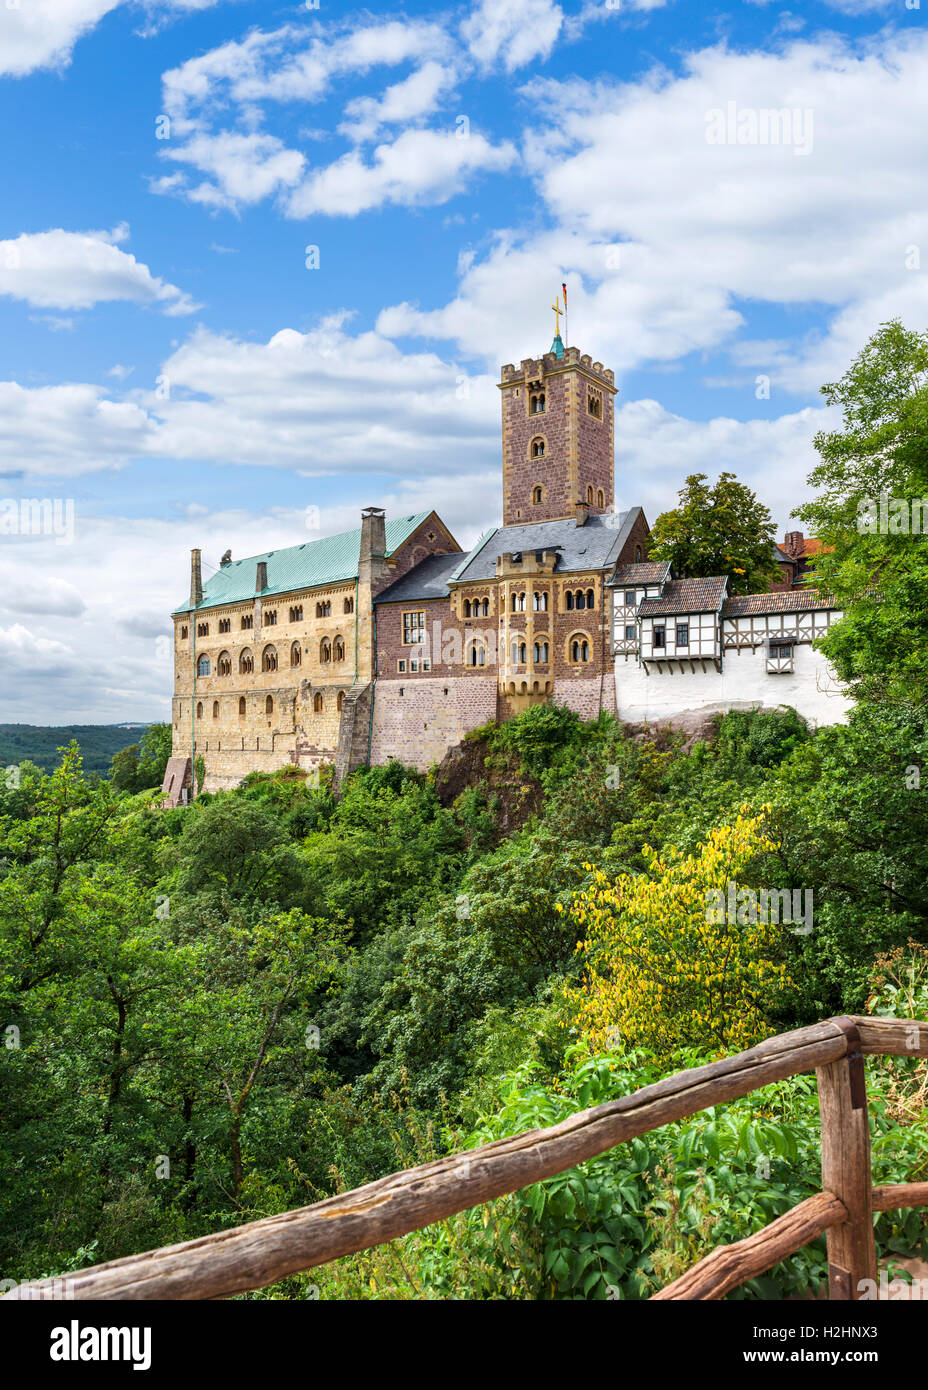 The Wartburg castle, where Martin Luther worked on translating the New Testament into German, Eisenach, Thuringia, Germany Stock Photo